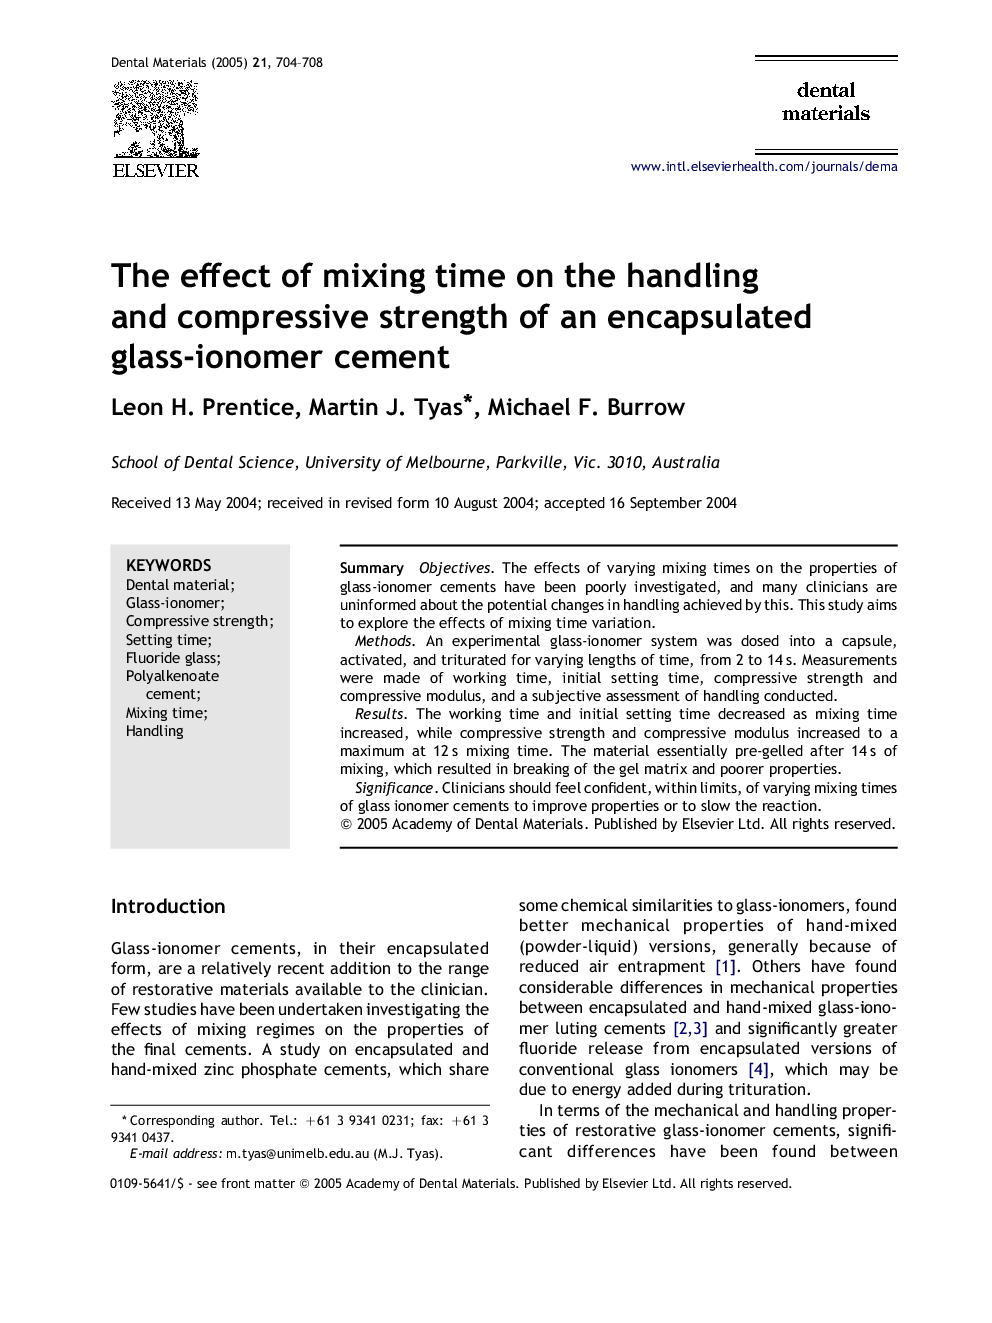 The effect of mixing time on the handling and compressive strength of an encapsulated glass-ionomer cement